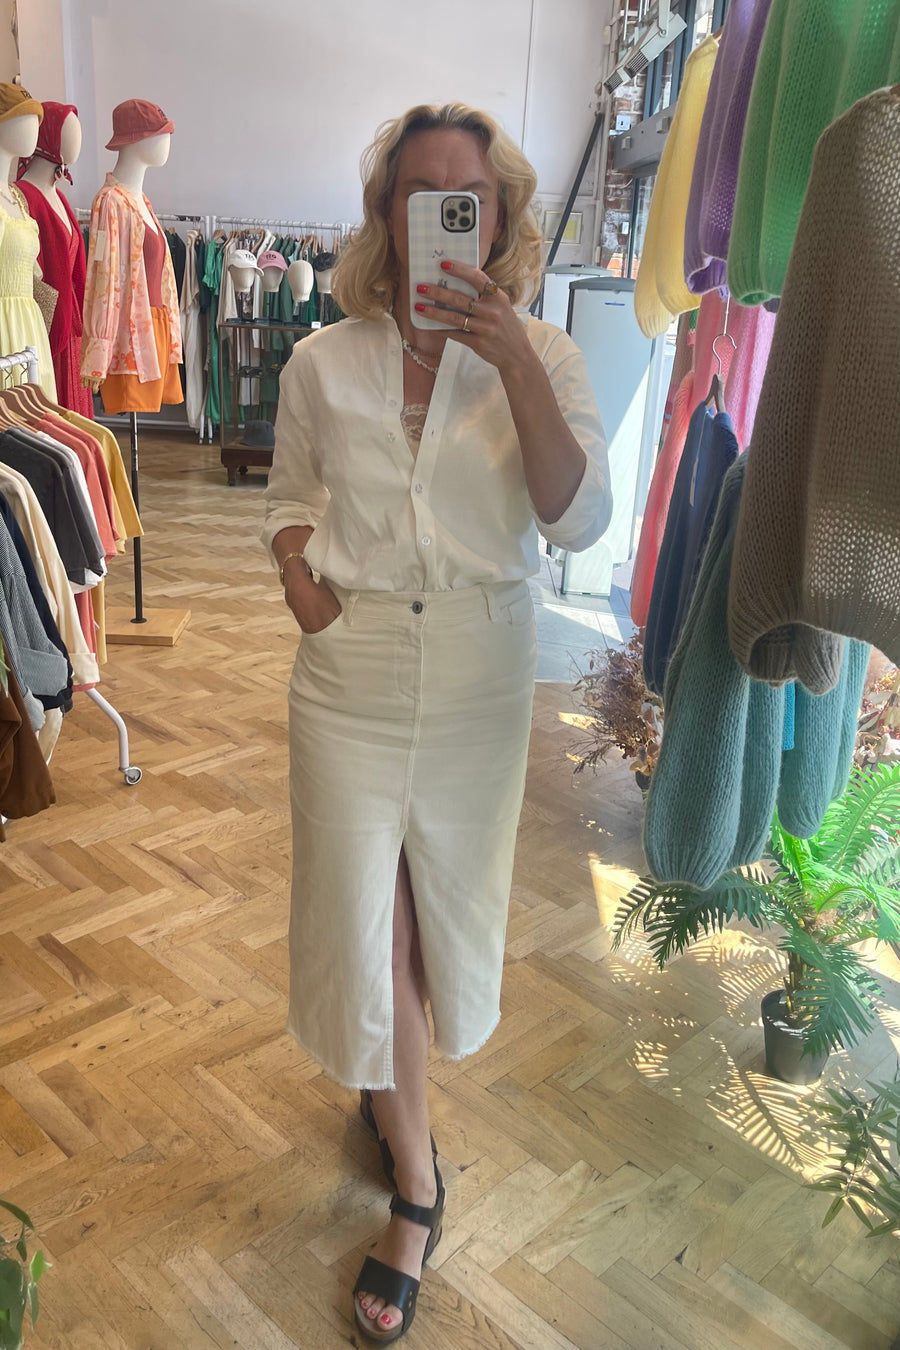 Woman in boutique wearing long white denim skirt, cotton button up shirt, and black summer sandals